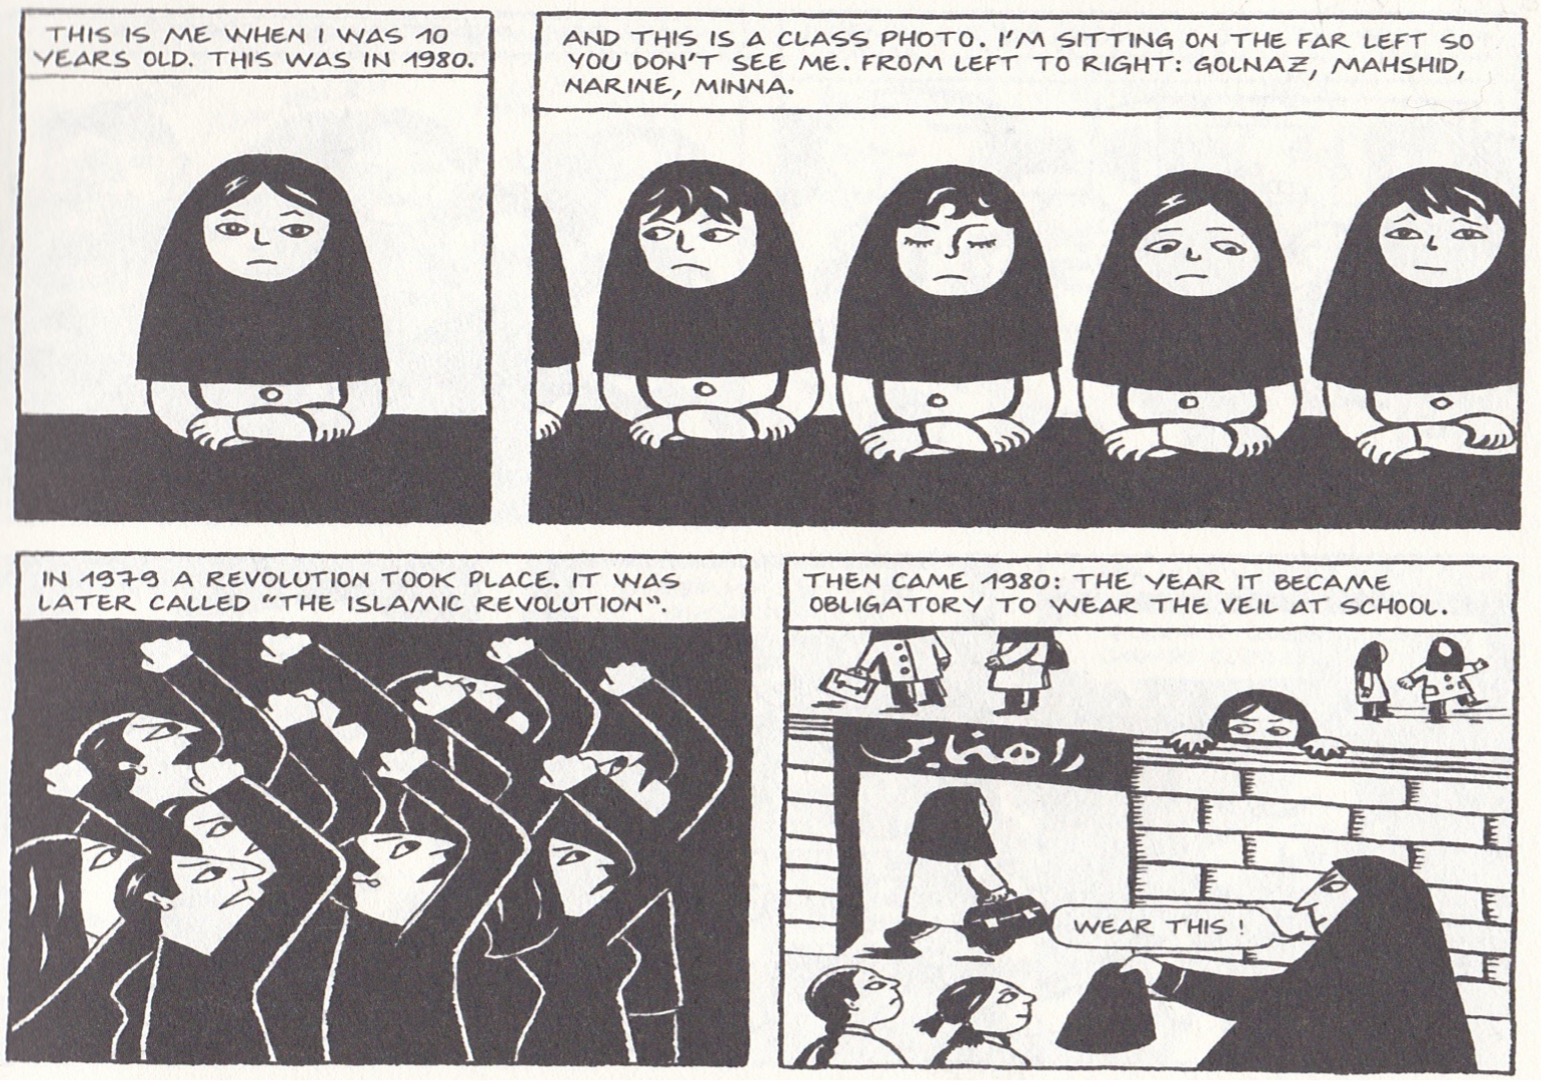 Figure 3. Satrapi, The Complete Persepolis, 3. Graphic Novel Excerpt from PERSEPOLIS: THE STORY OF A CHILDHOOD by Marjane Satrapi, translation copyright © 2003 by L’Association, Paris, France. Used by permission of Pantheon Books, an imprint of the Knopf Doubleday Publishing Group, a division of Penguin Random House LLC. All rights reserved. 